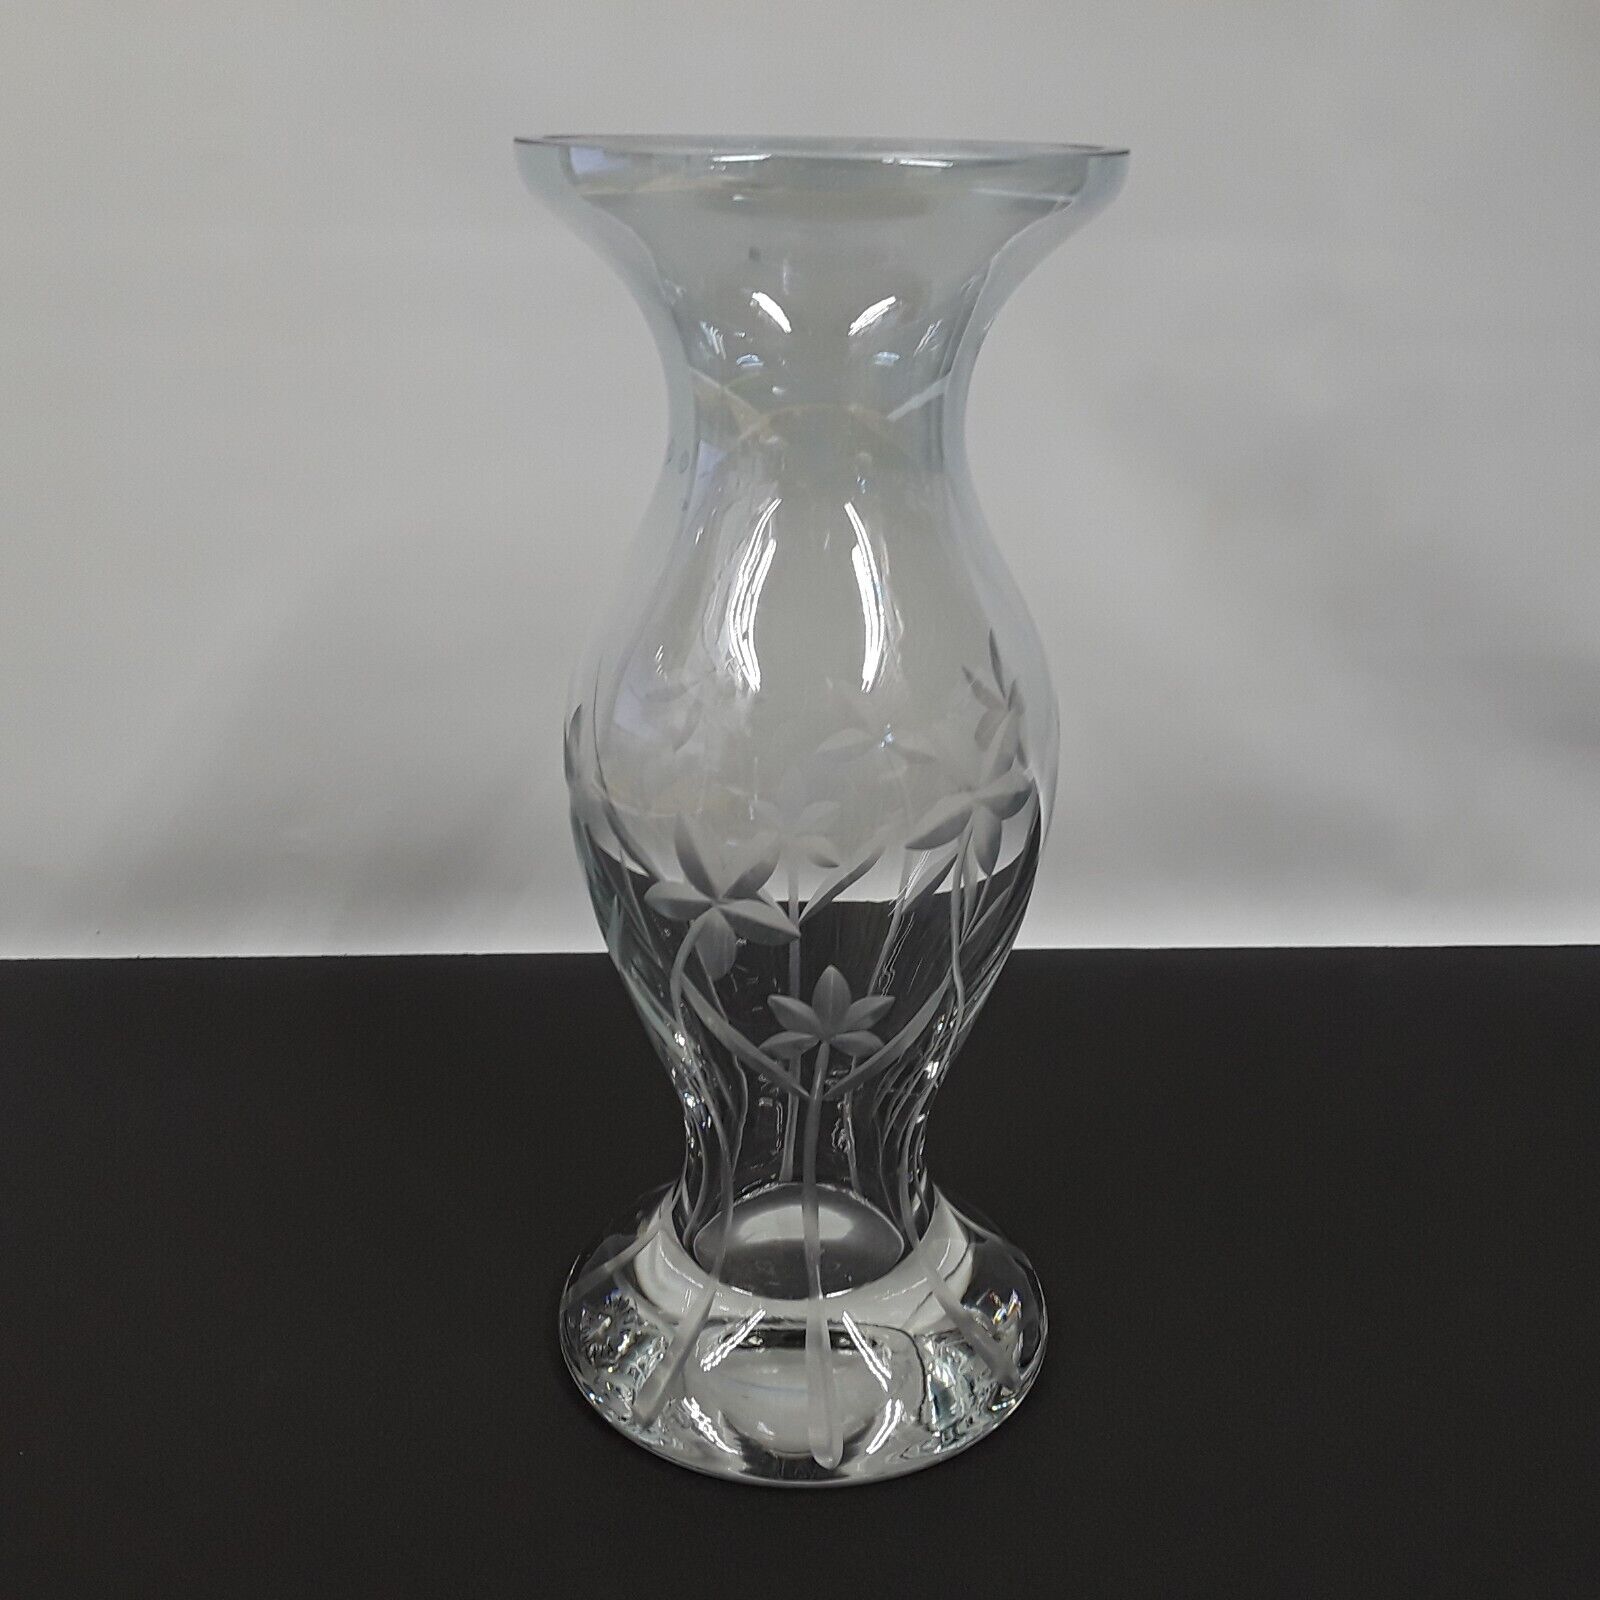 Lenox Etched Crystal Petite Floral Romania 8.75 inch